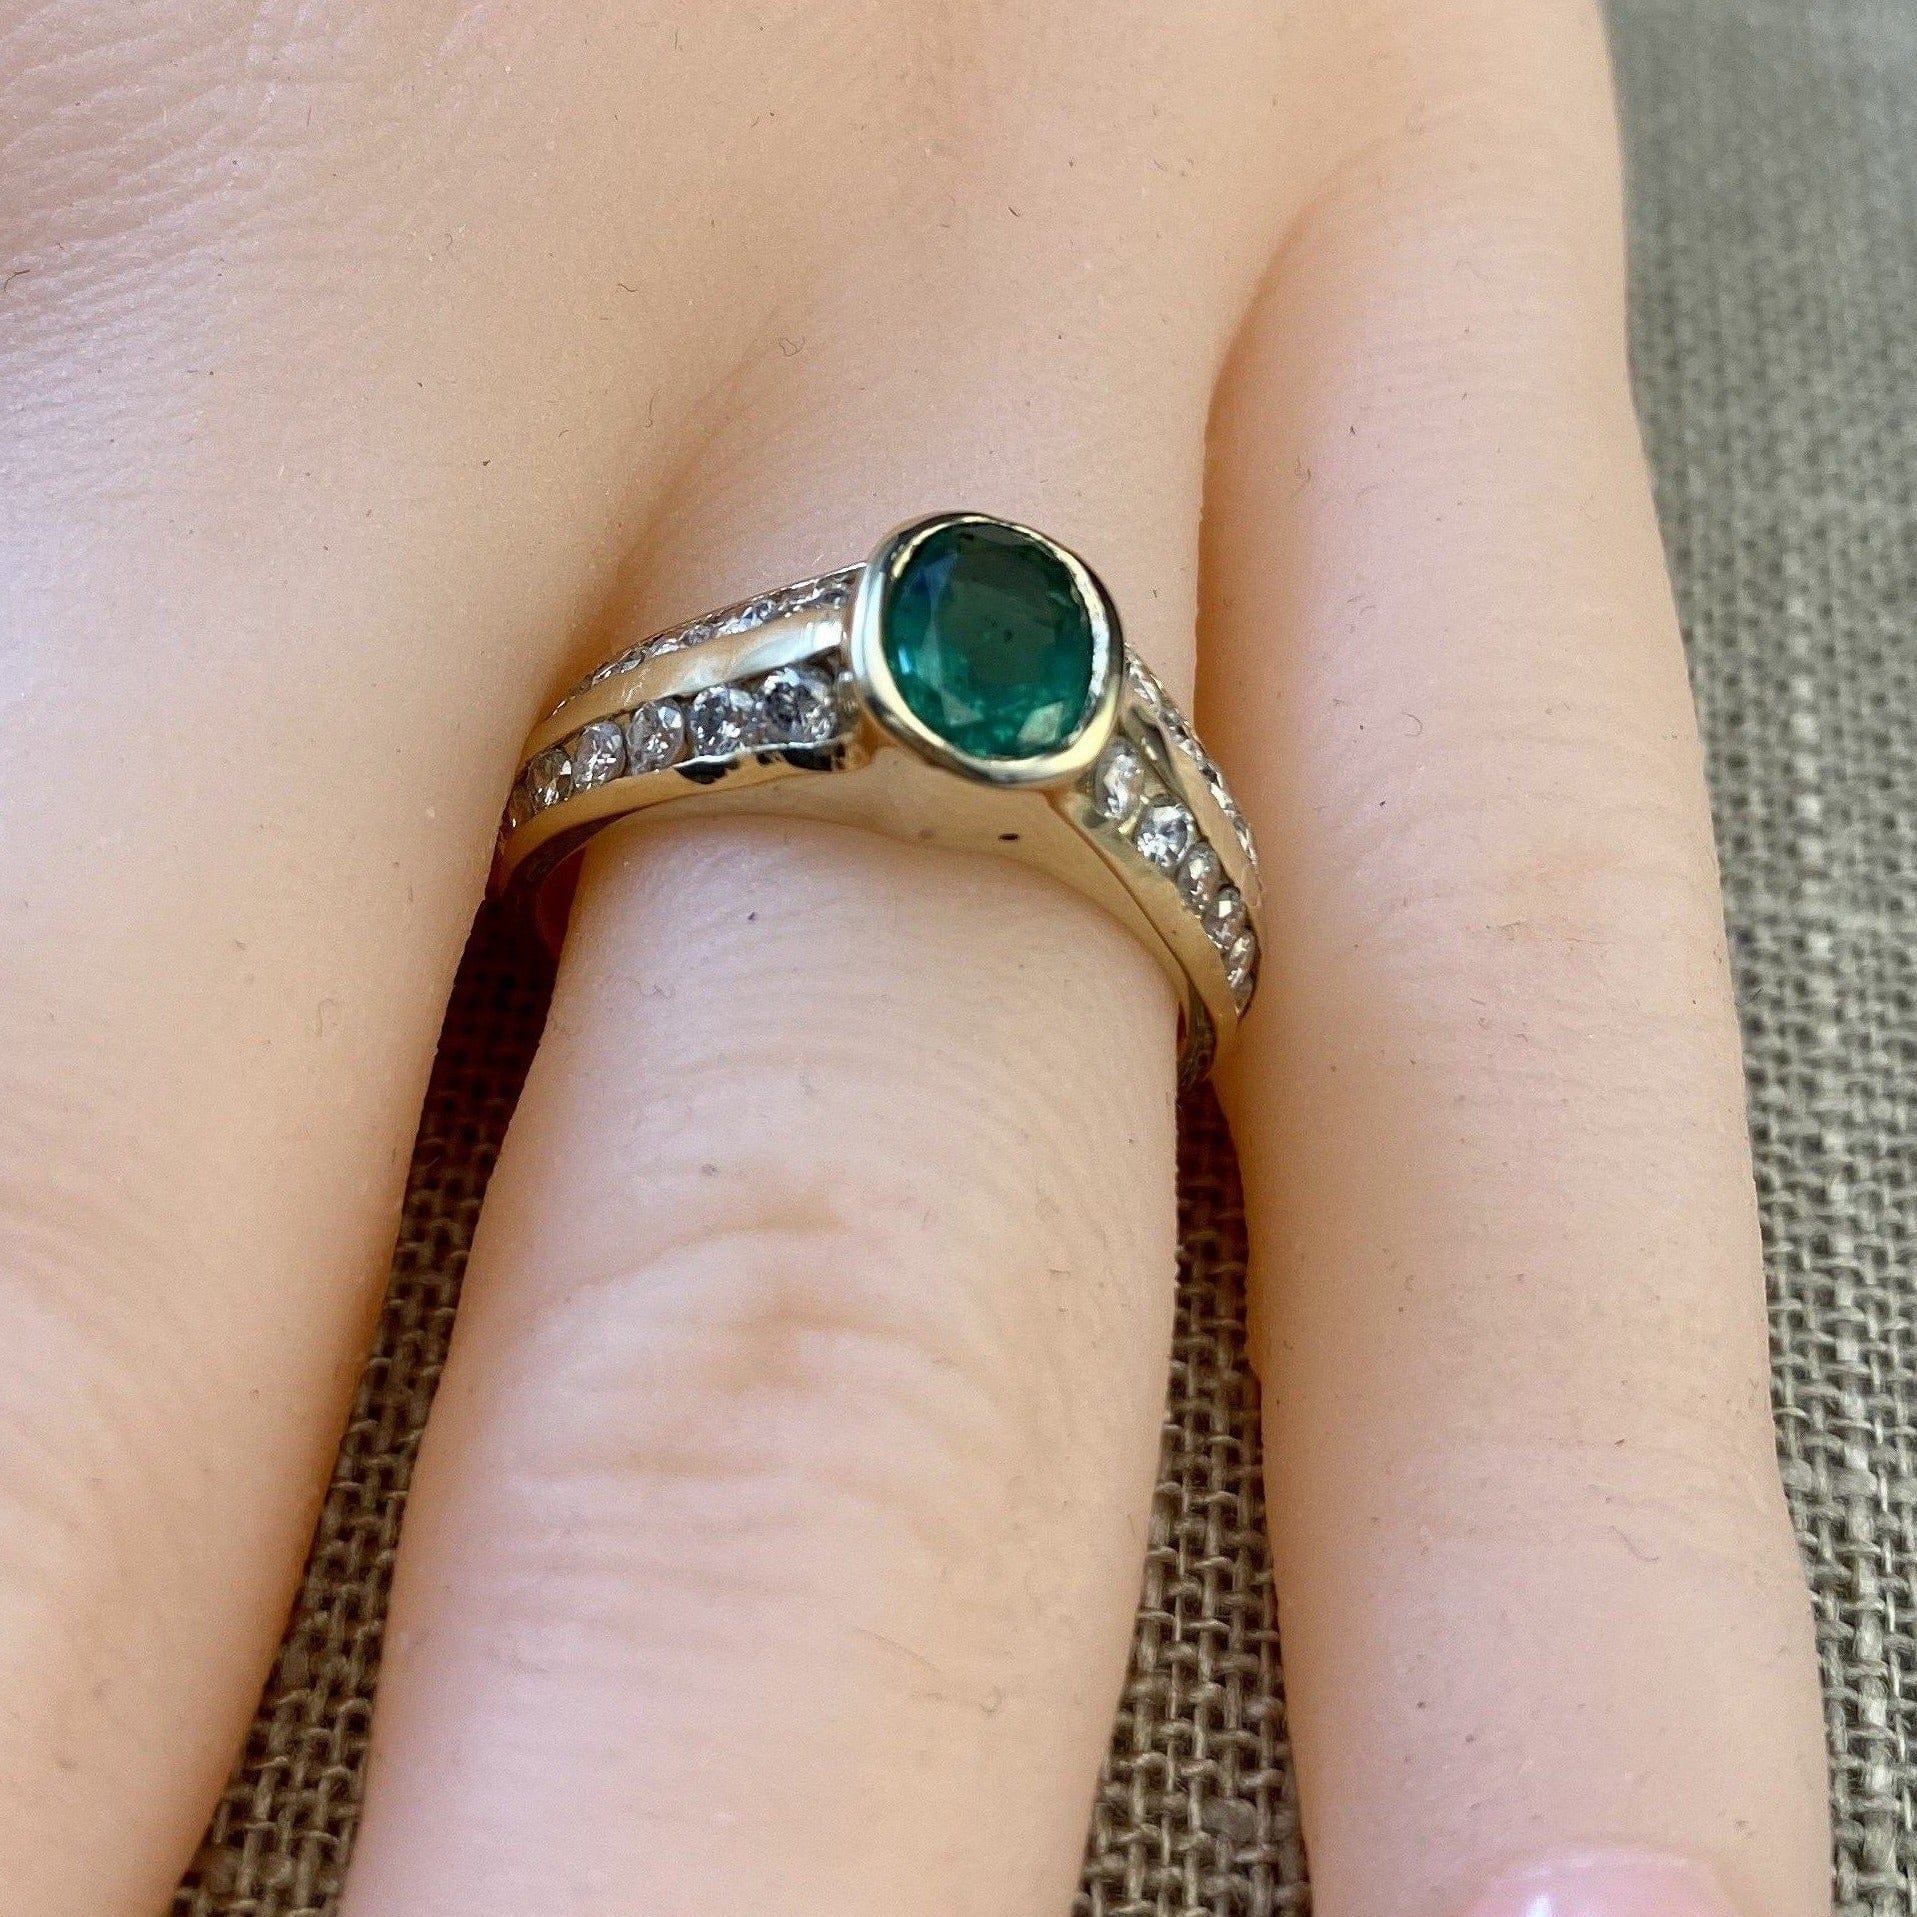 FJL Jewelry Gemstone Ring Exquisite oval-cut emerald weighing 0.88 carats surrounded by channel-set brilliant diamonds totaling 0.65 carats, low bezel setting